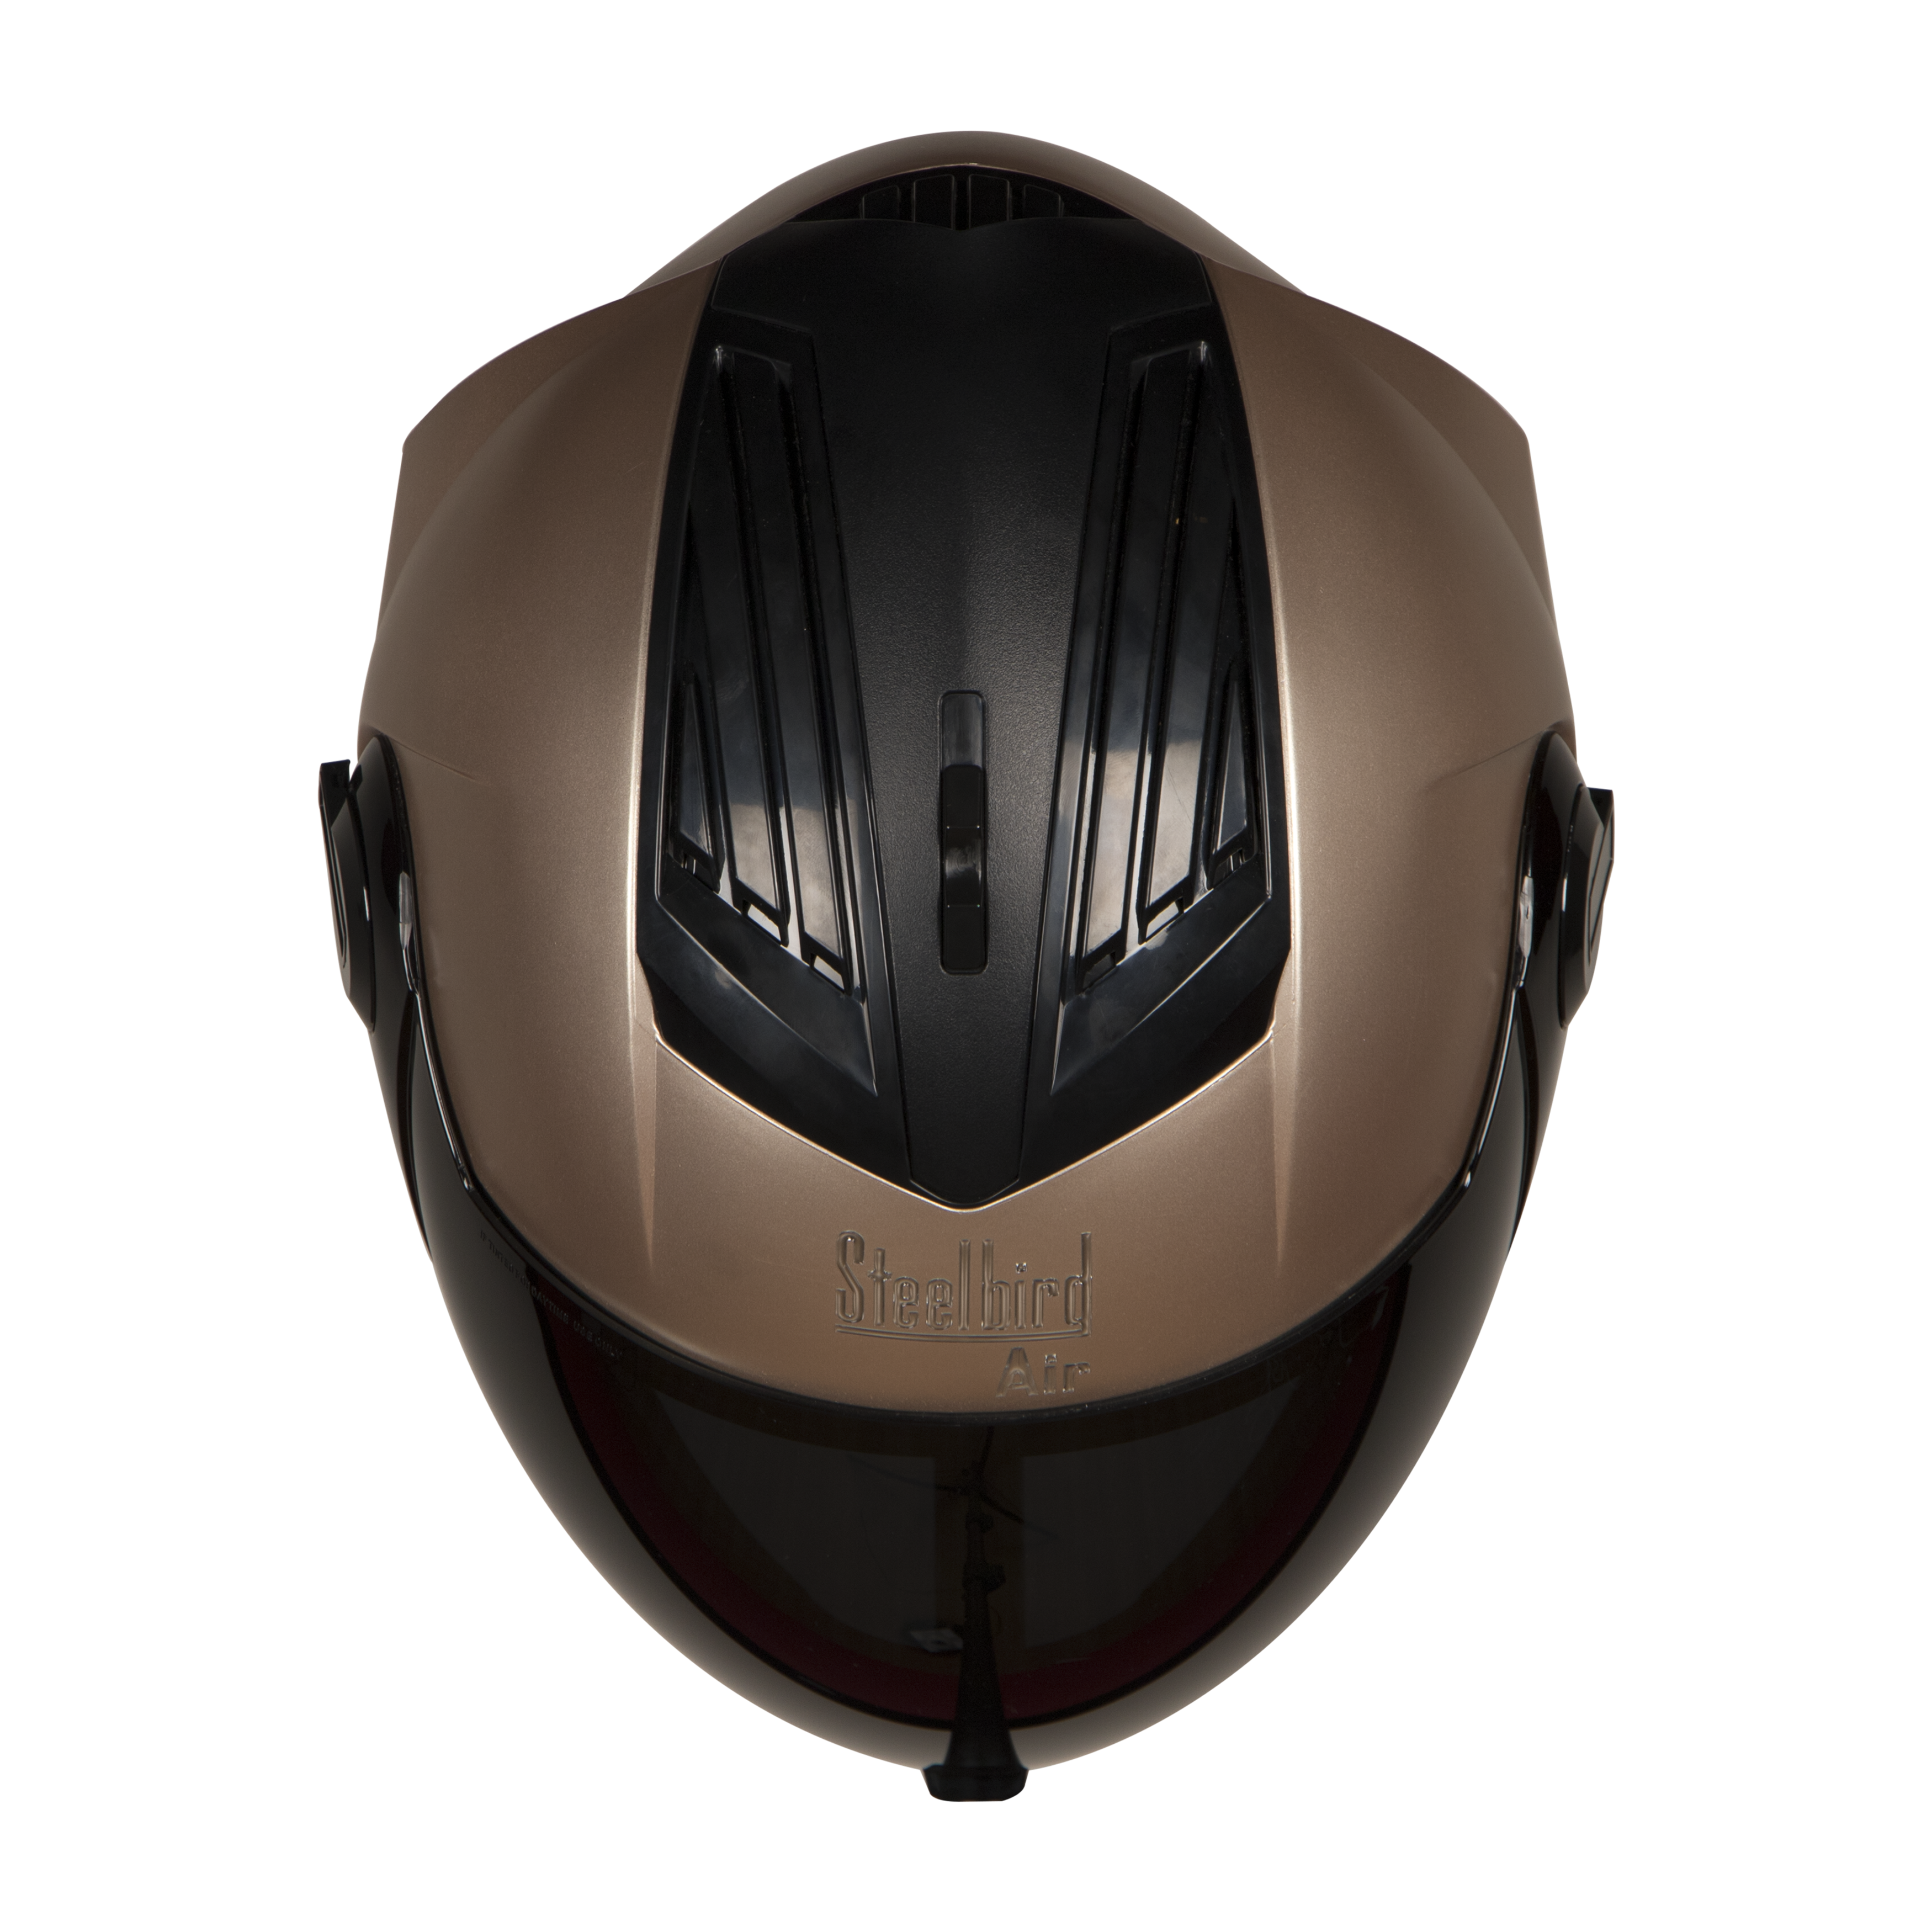 SBA-2 Mat Rose Gold ( Fitted With Clear Visor Extra Smoke Visor Free)